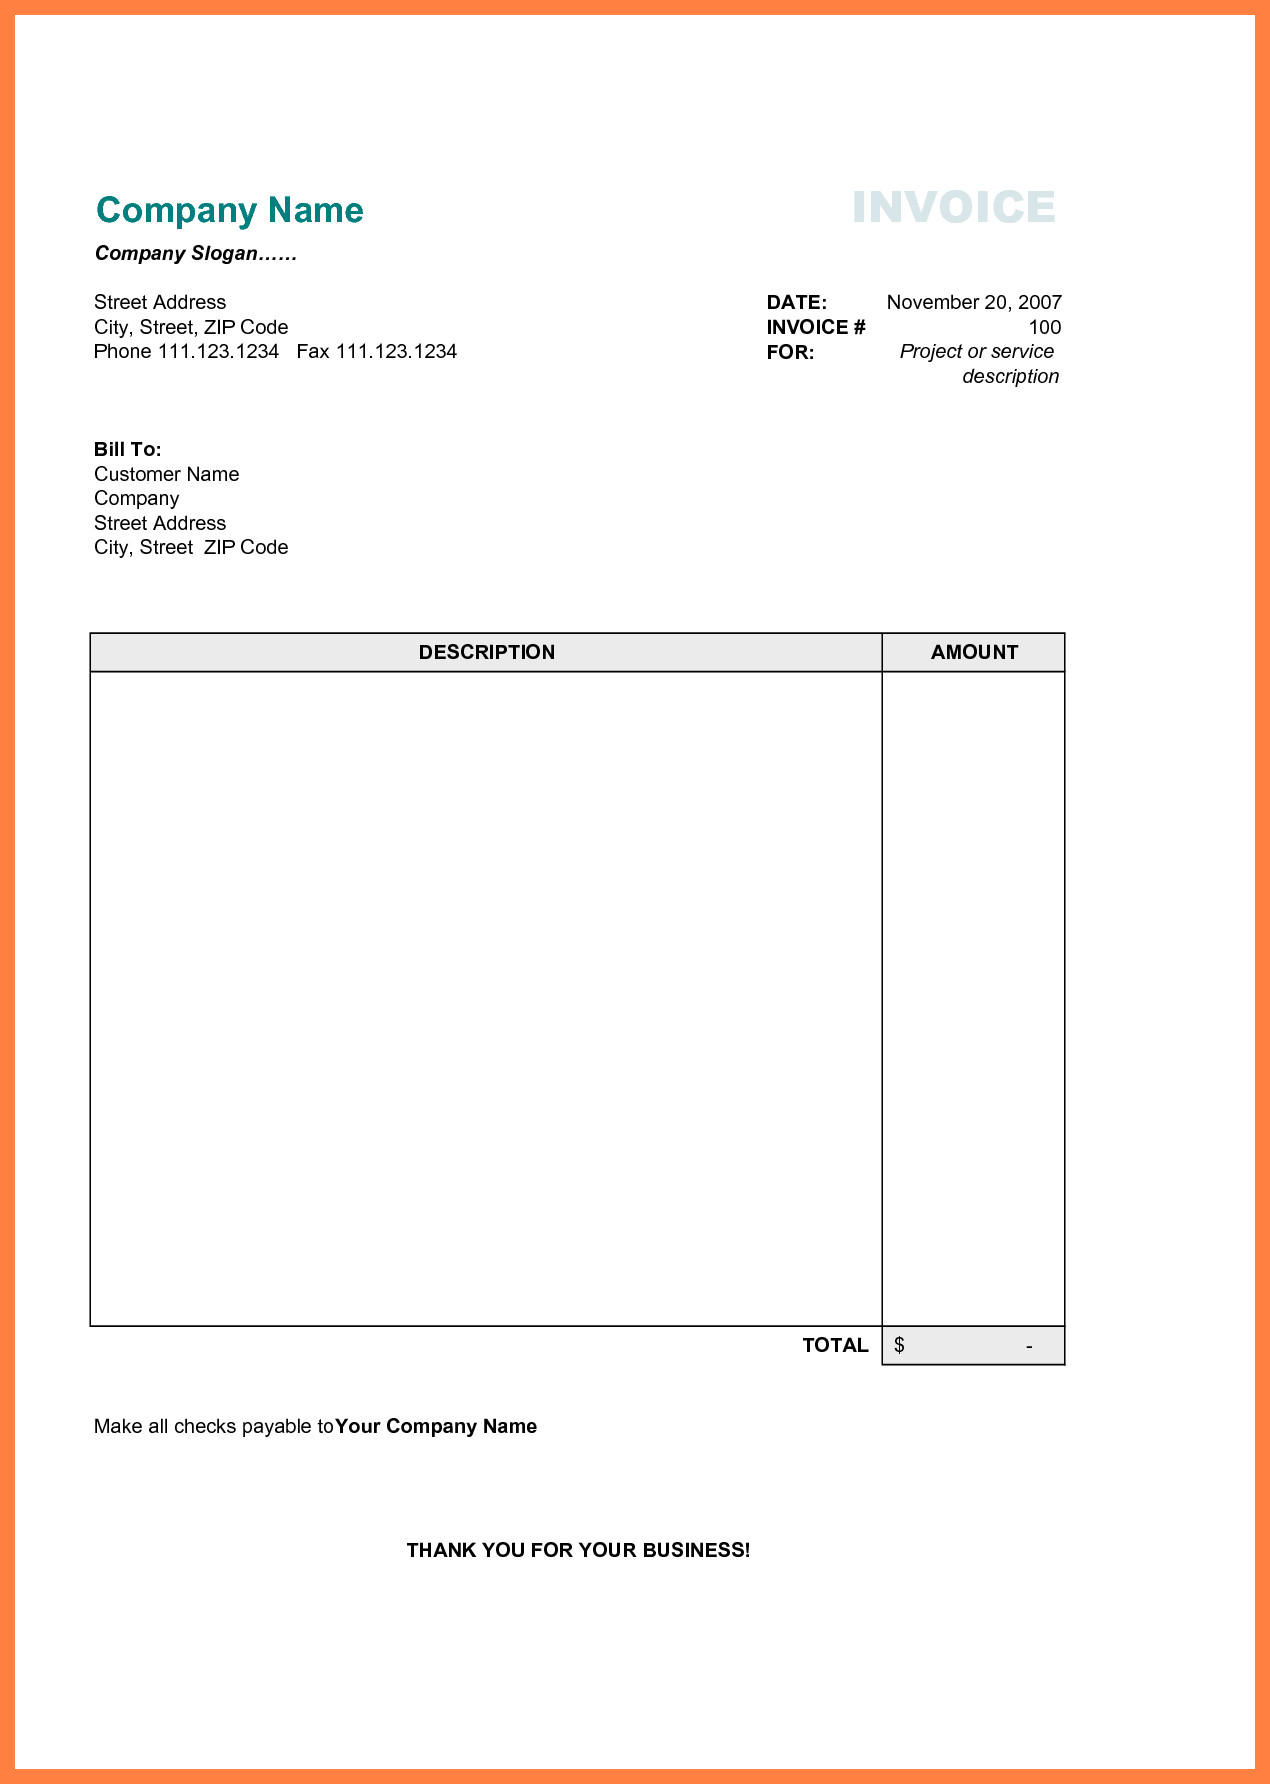 Free Printable Business Invoice Template invoice format